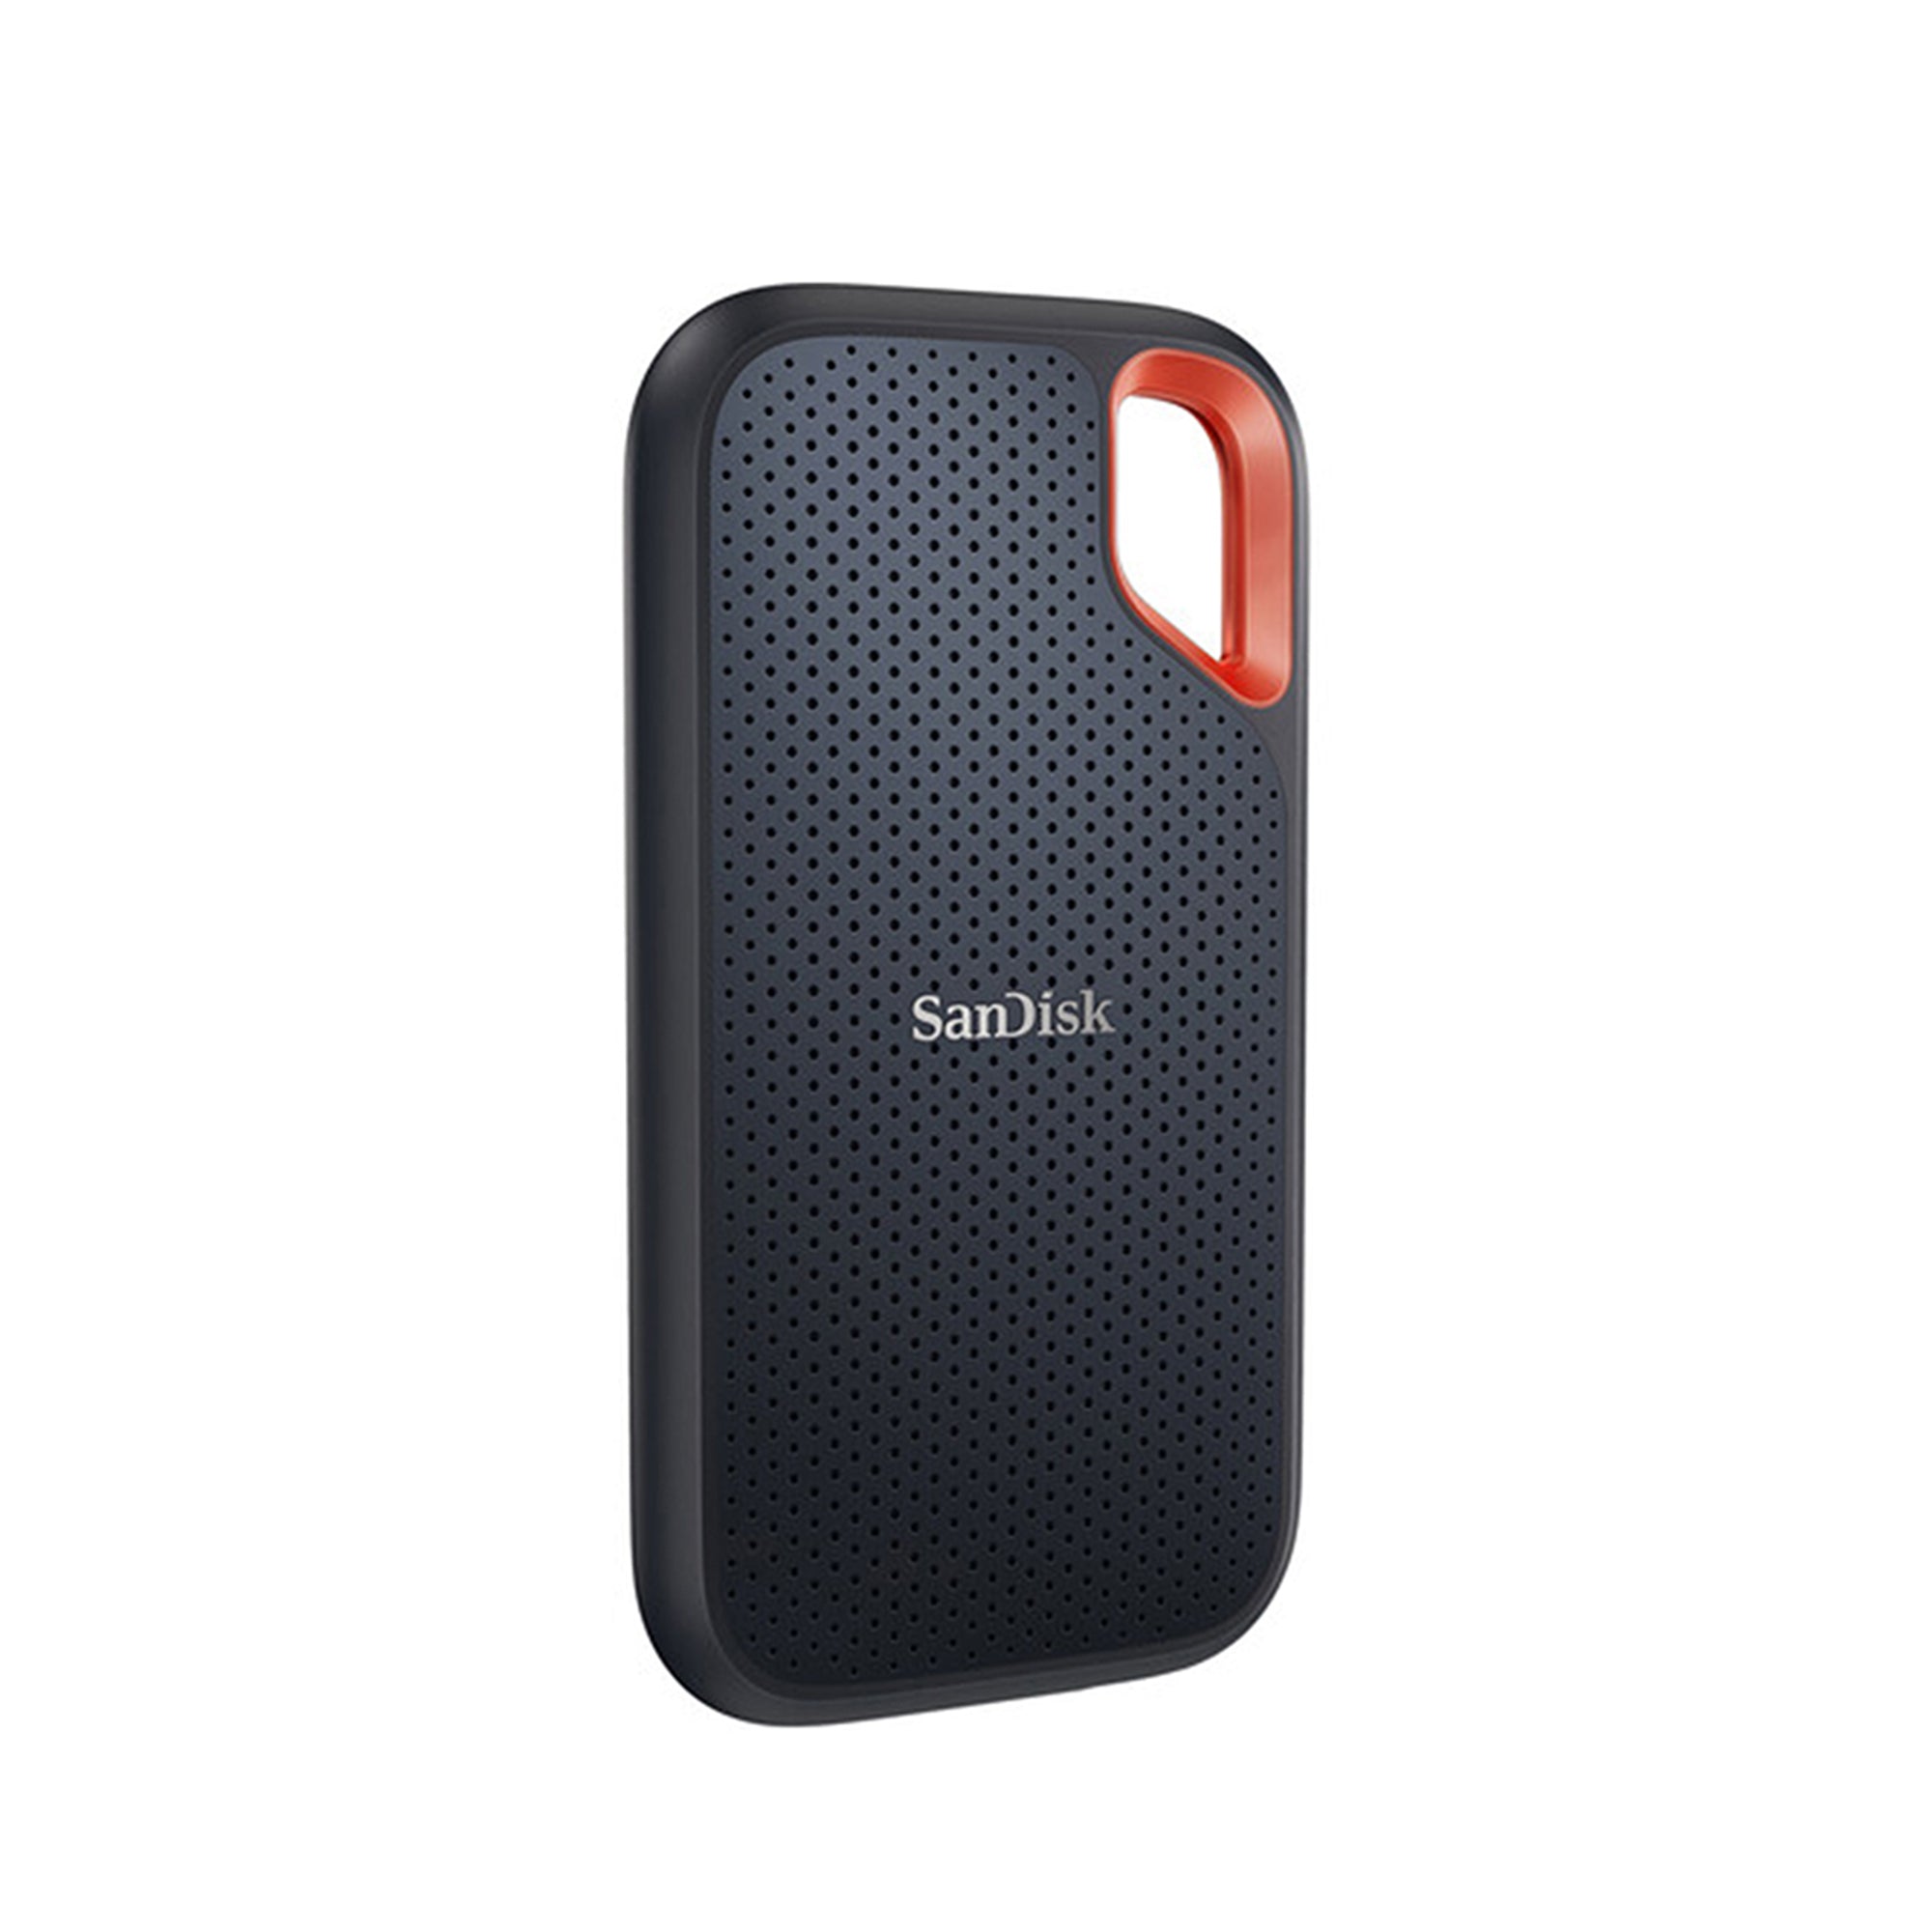 SanDisk Extreme Portable SSD 500GB V2 Up to 1050 MB/s Read Speed